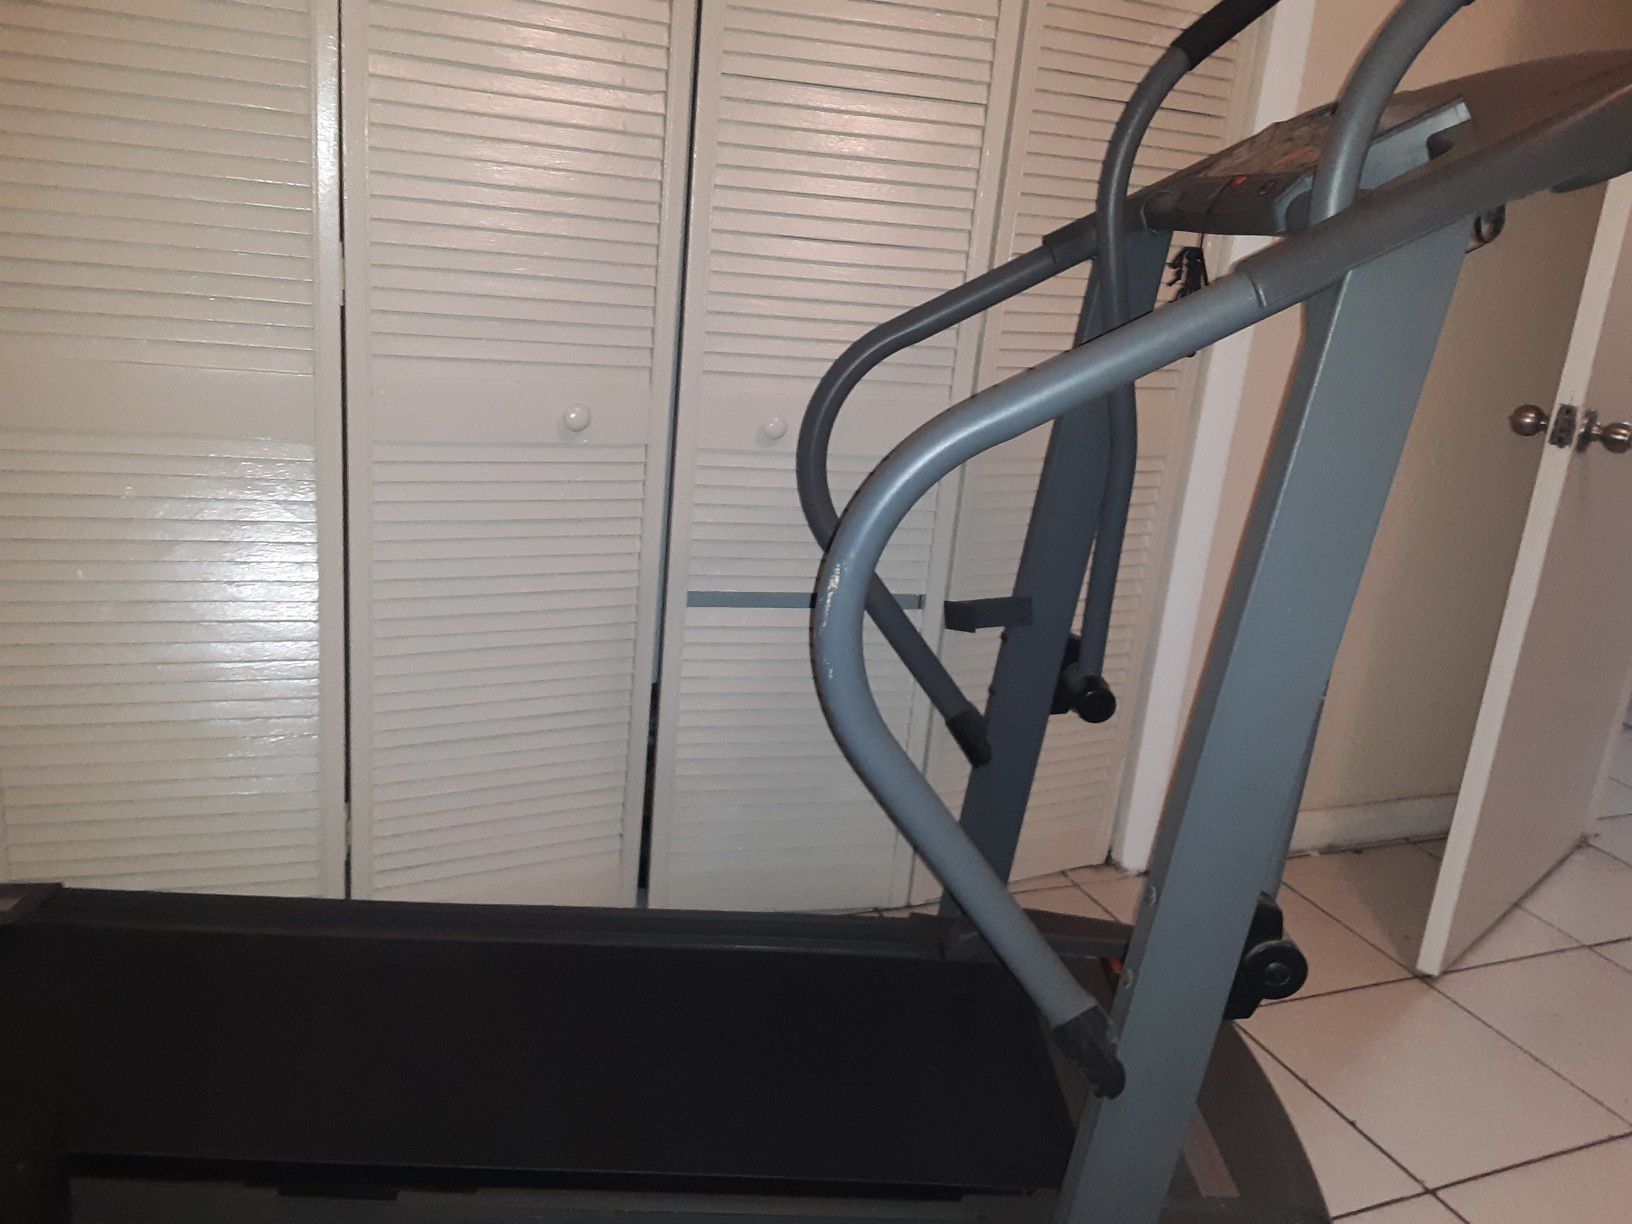 free treadmill does not run may be because of the belt no delivery or help to load but its free